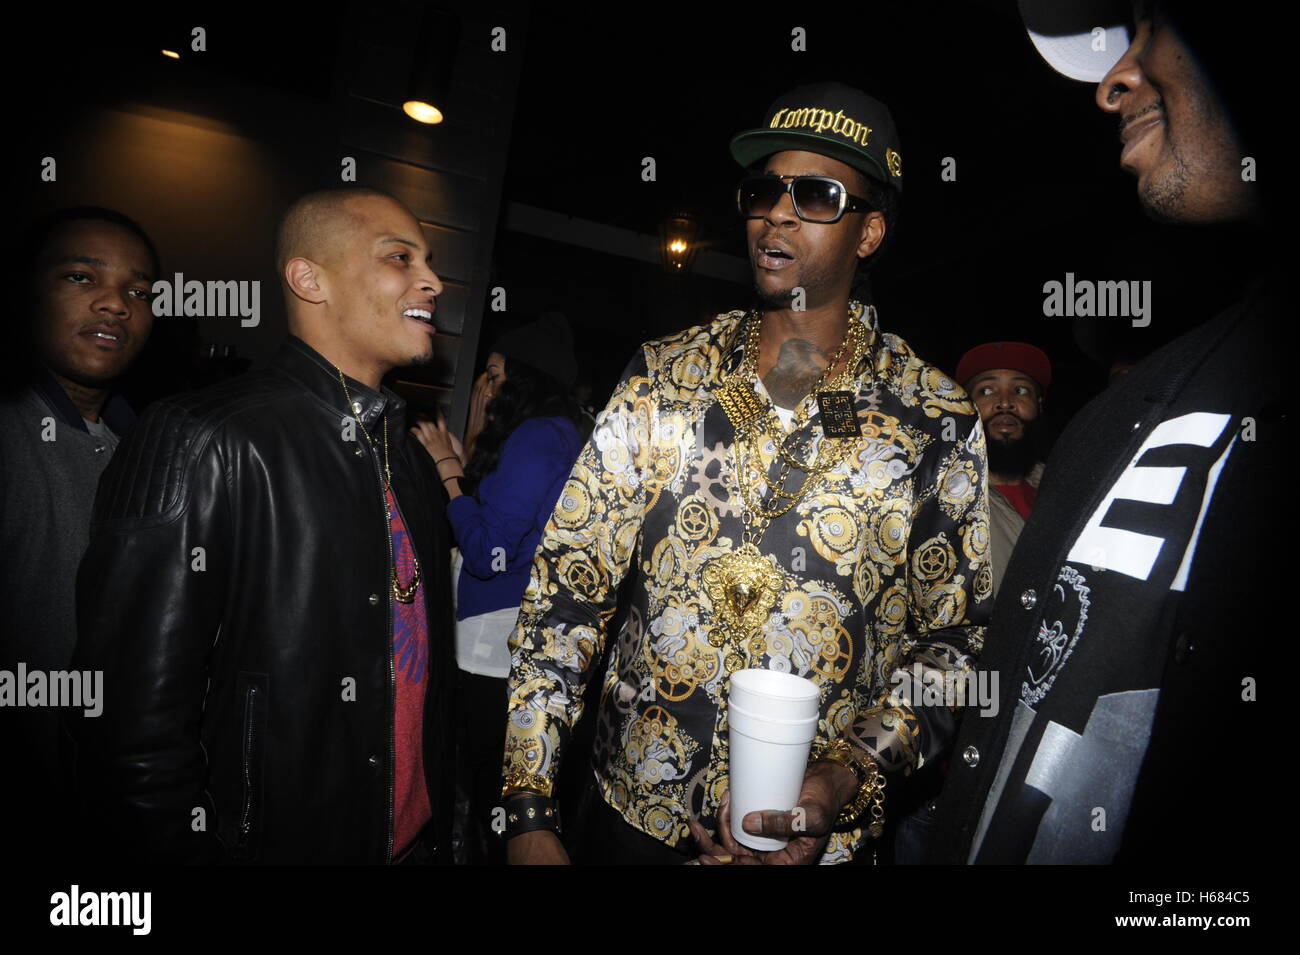 (L-R) EXCLUSIVE: Rappers T.I. and 2 Chainz attends Young Jeezy and 2 Chainz 'RIP' Music Video at Greystone Manor on February 11, 2013 in Los Angeles, California. Stock Photo